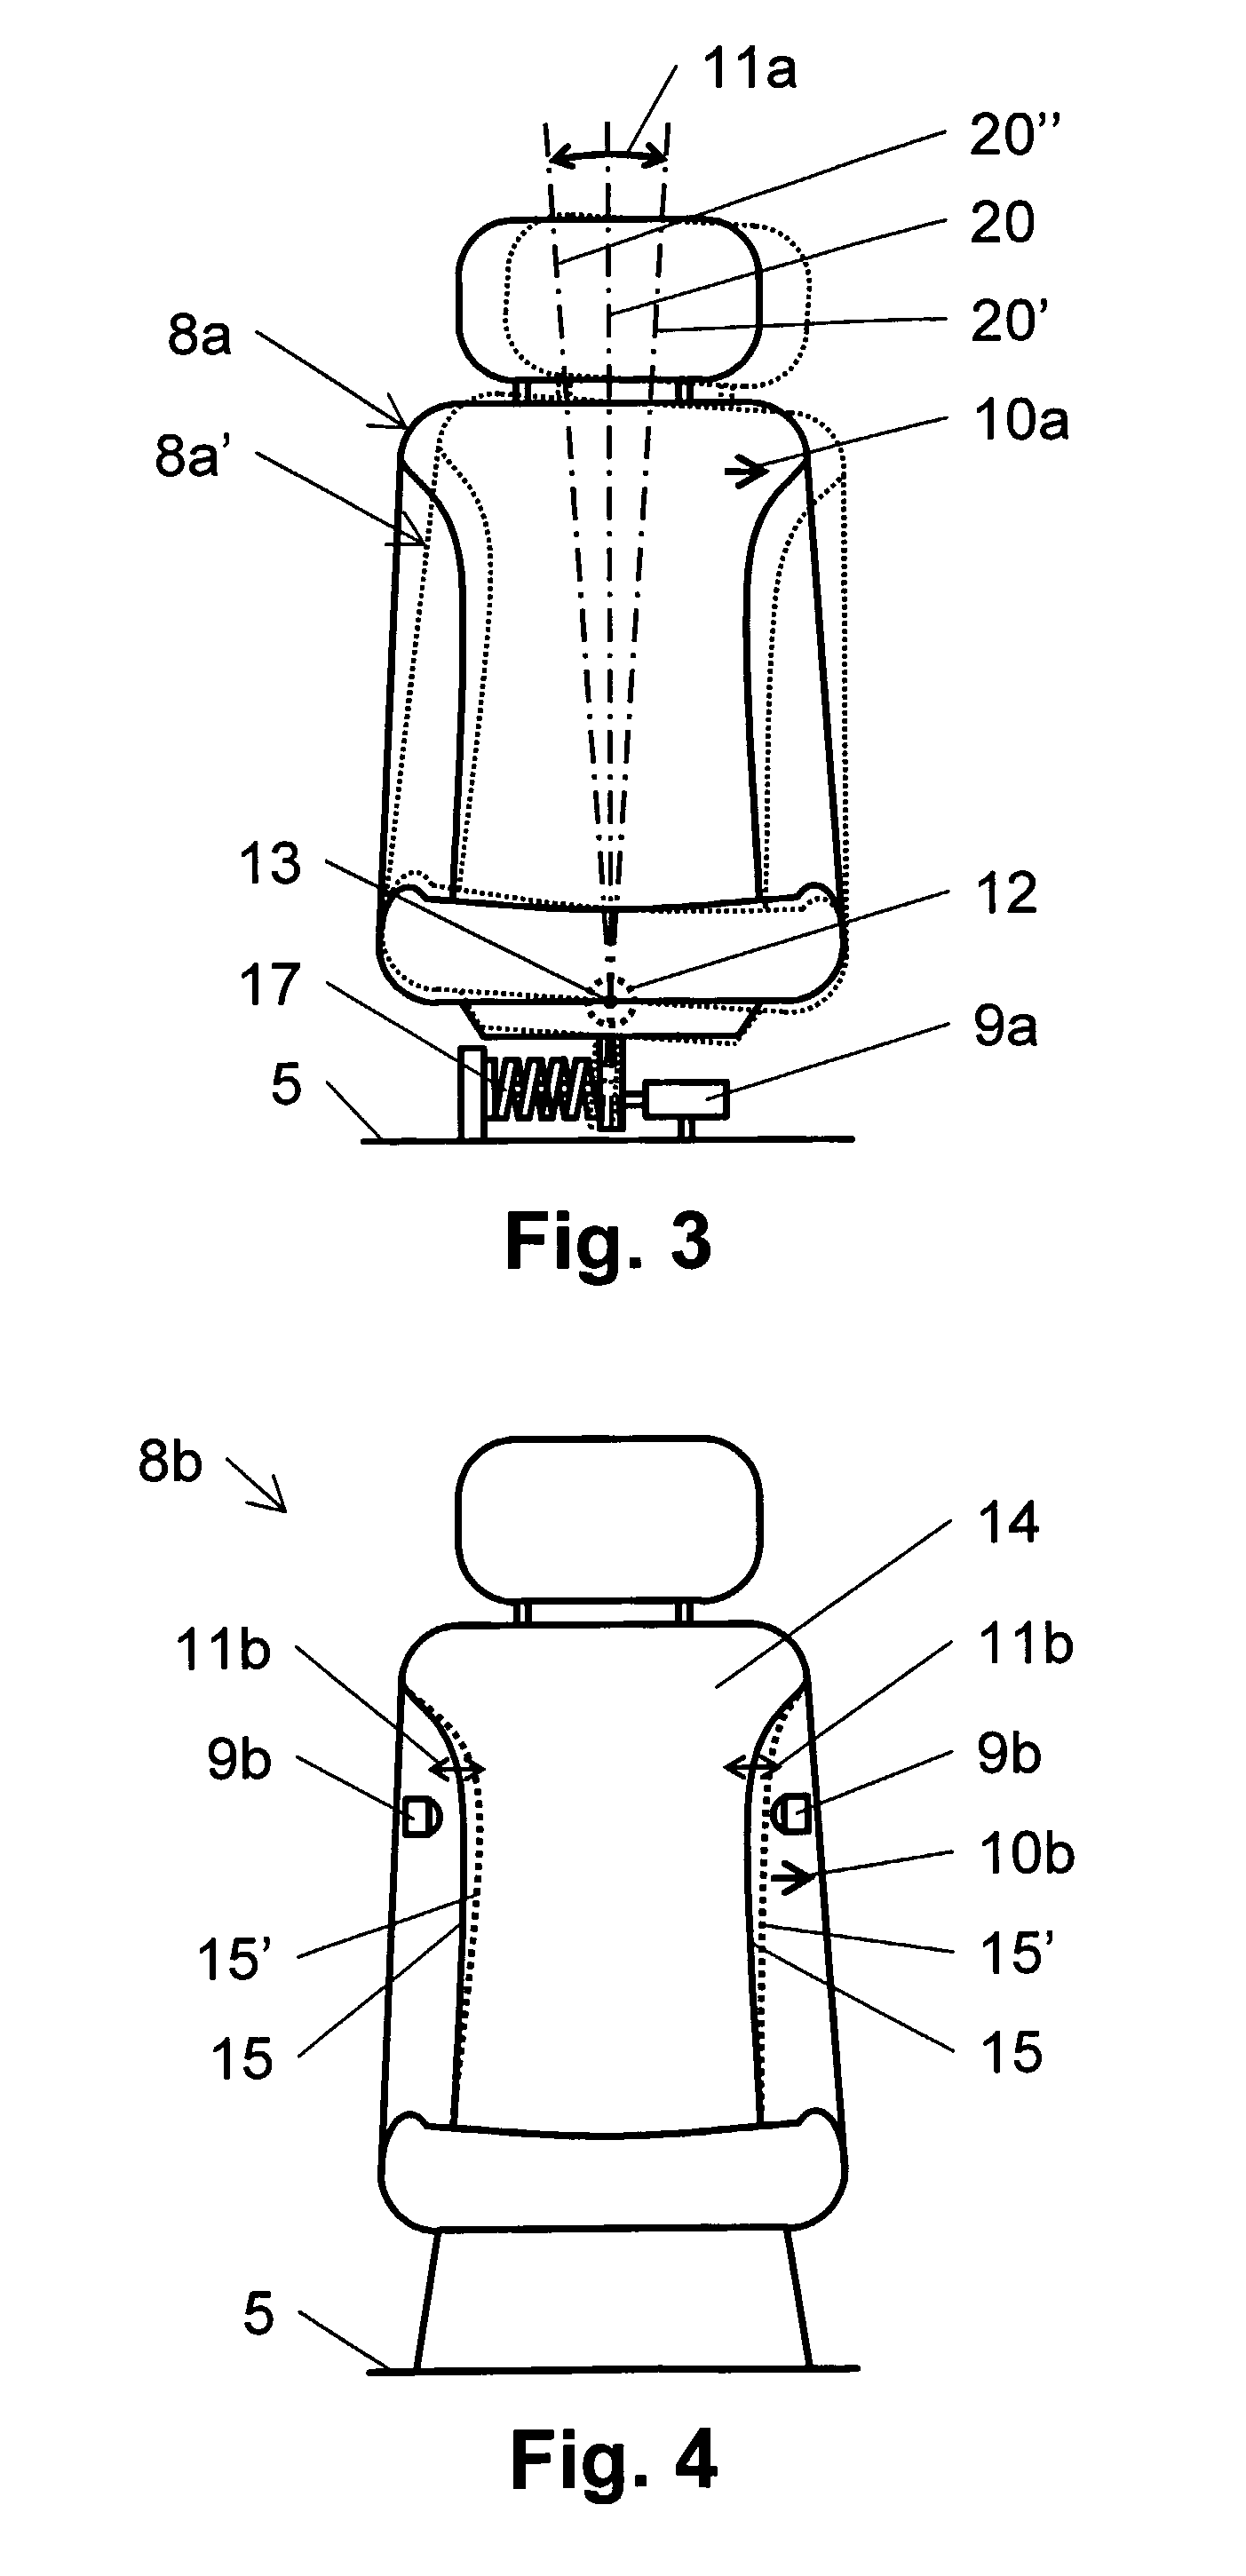 Multitrack curve-tilting vehicle, and method for tilting a vehicle